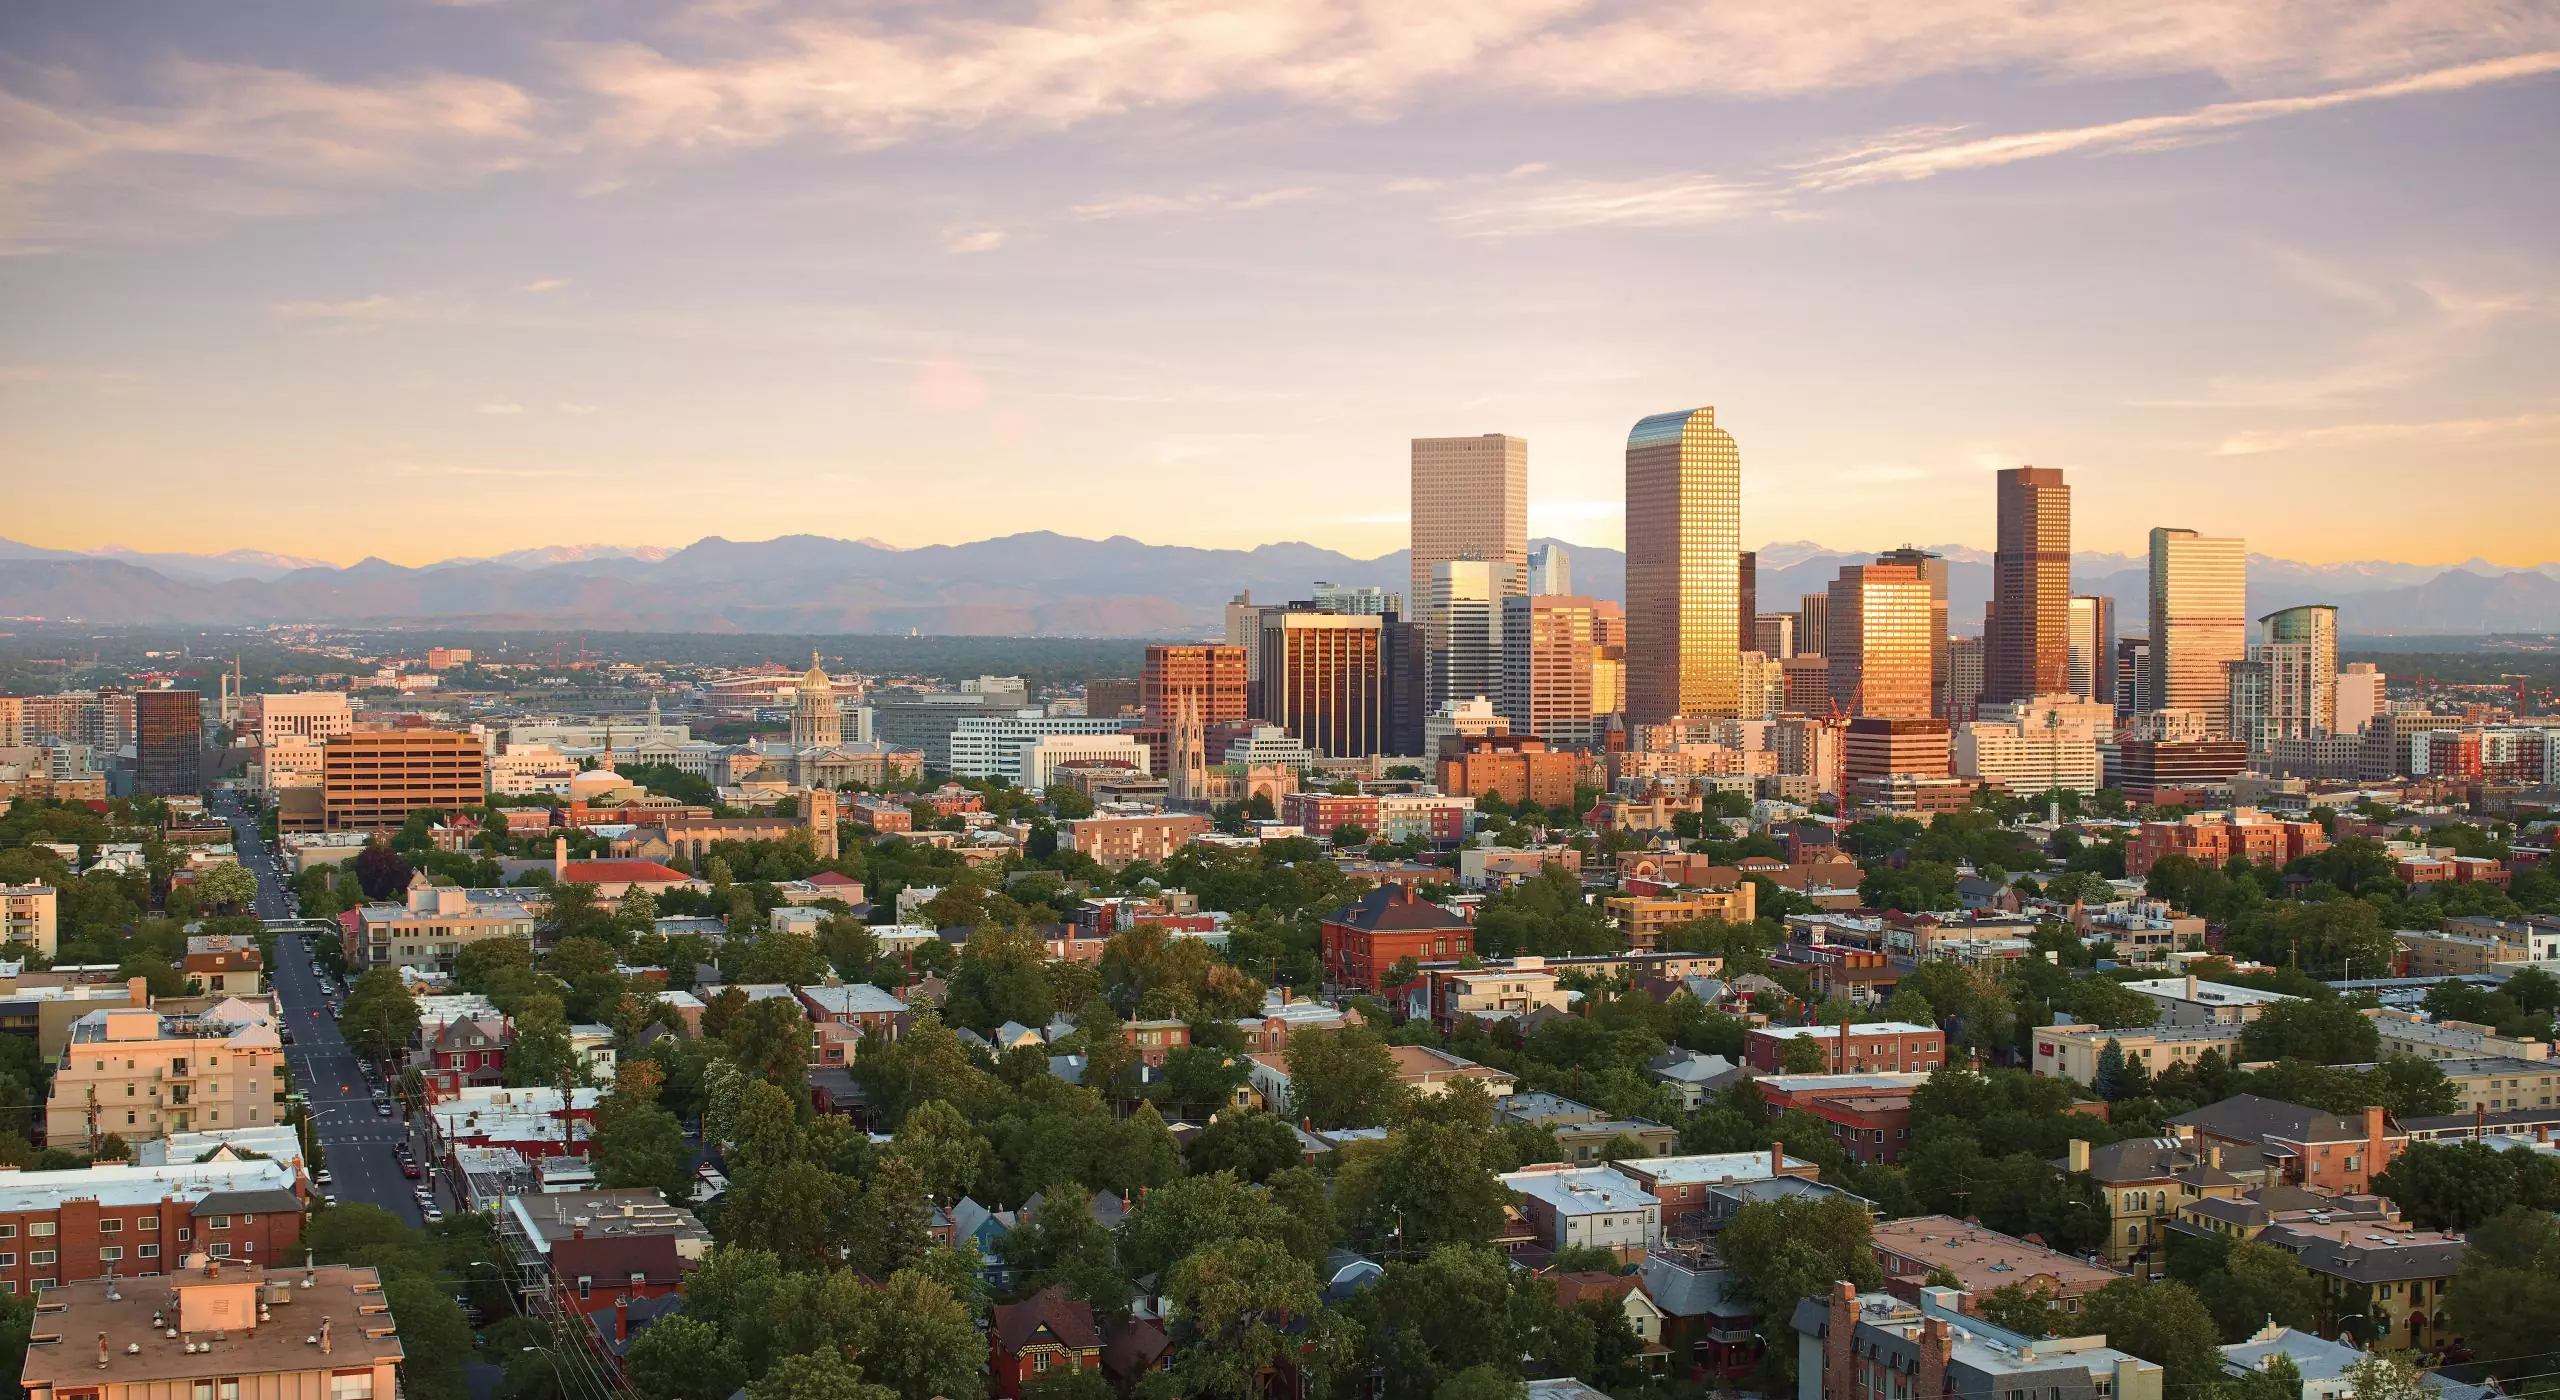 Visiting Denver Colorado? Here’s What you need to Know